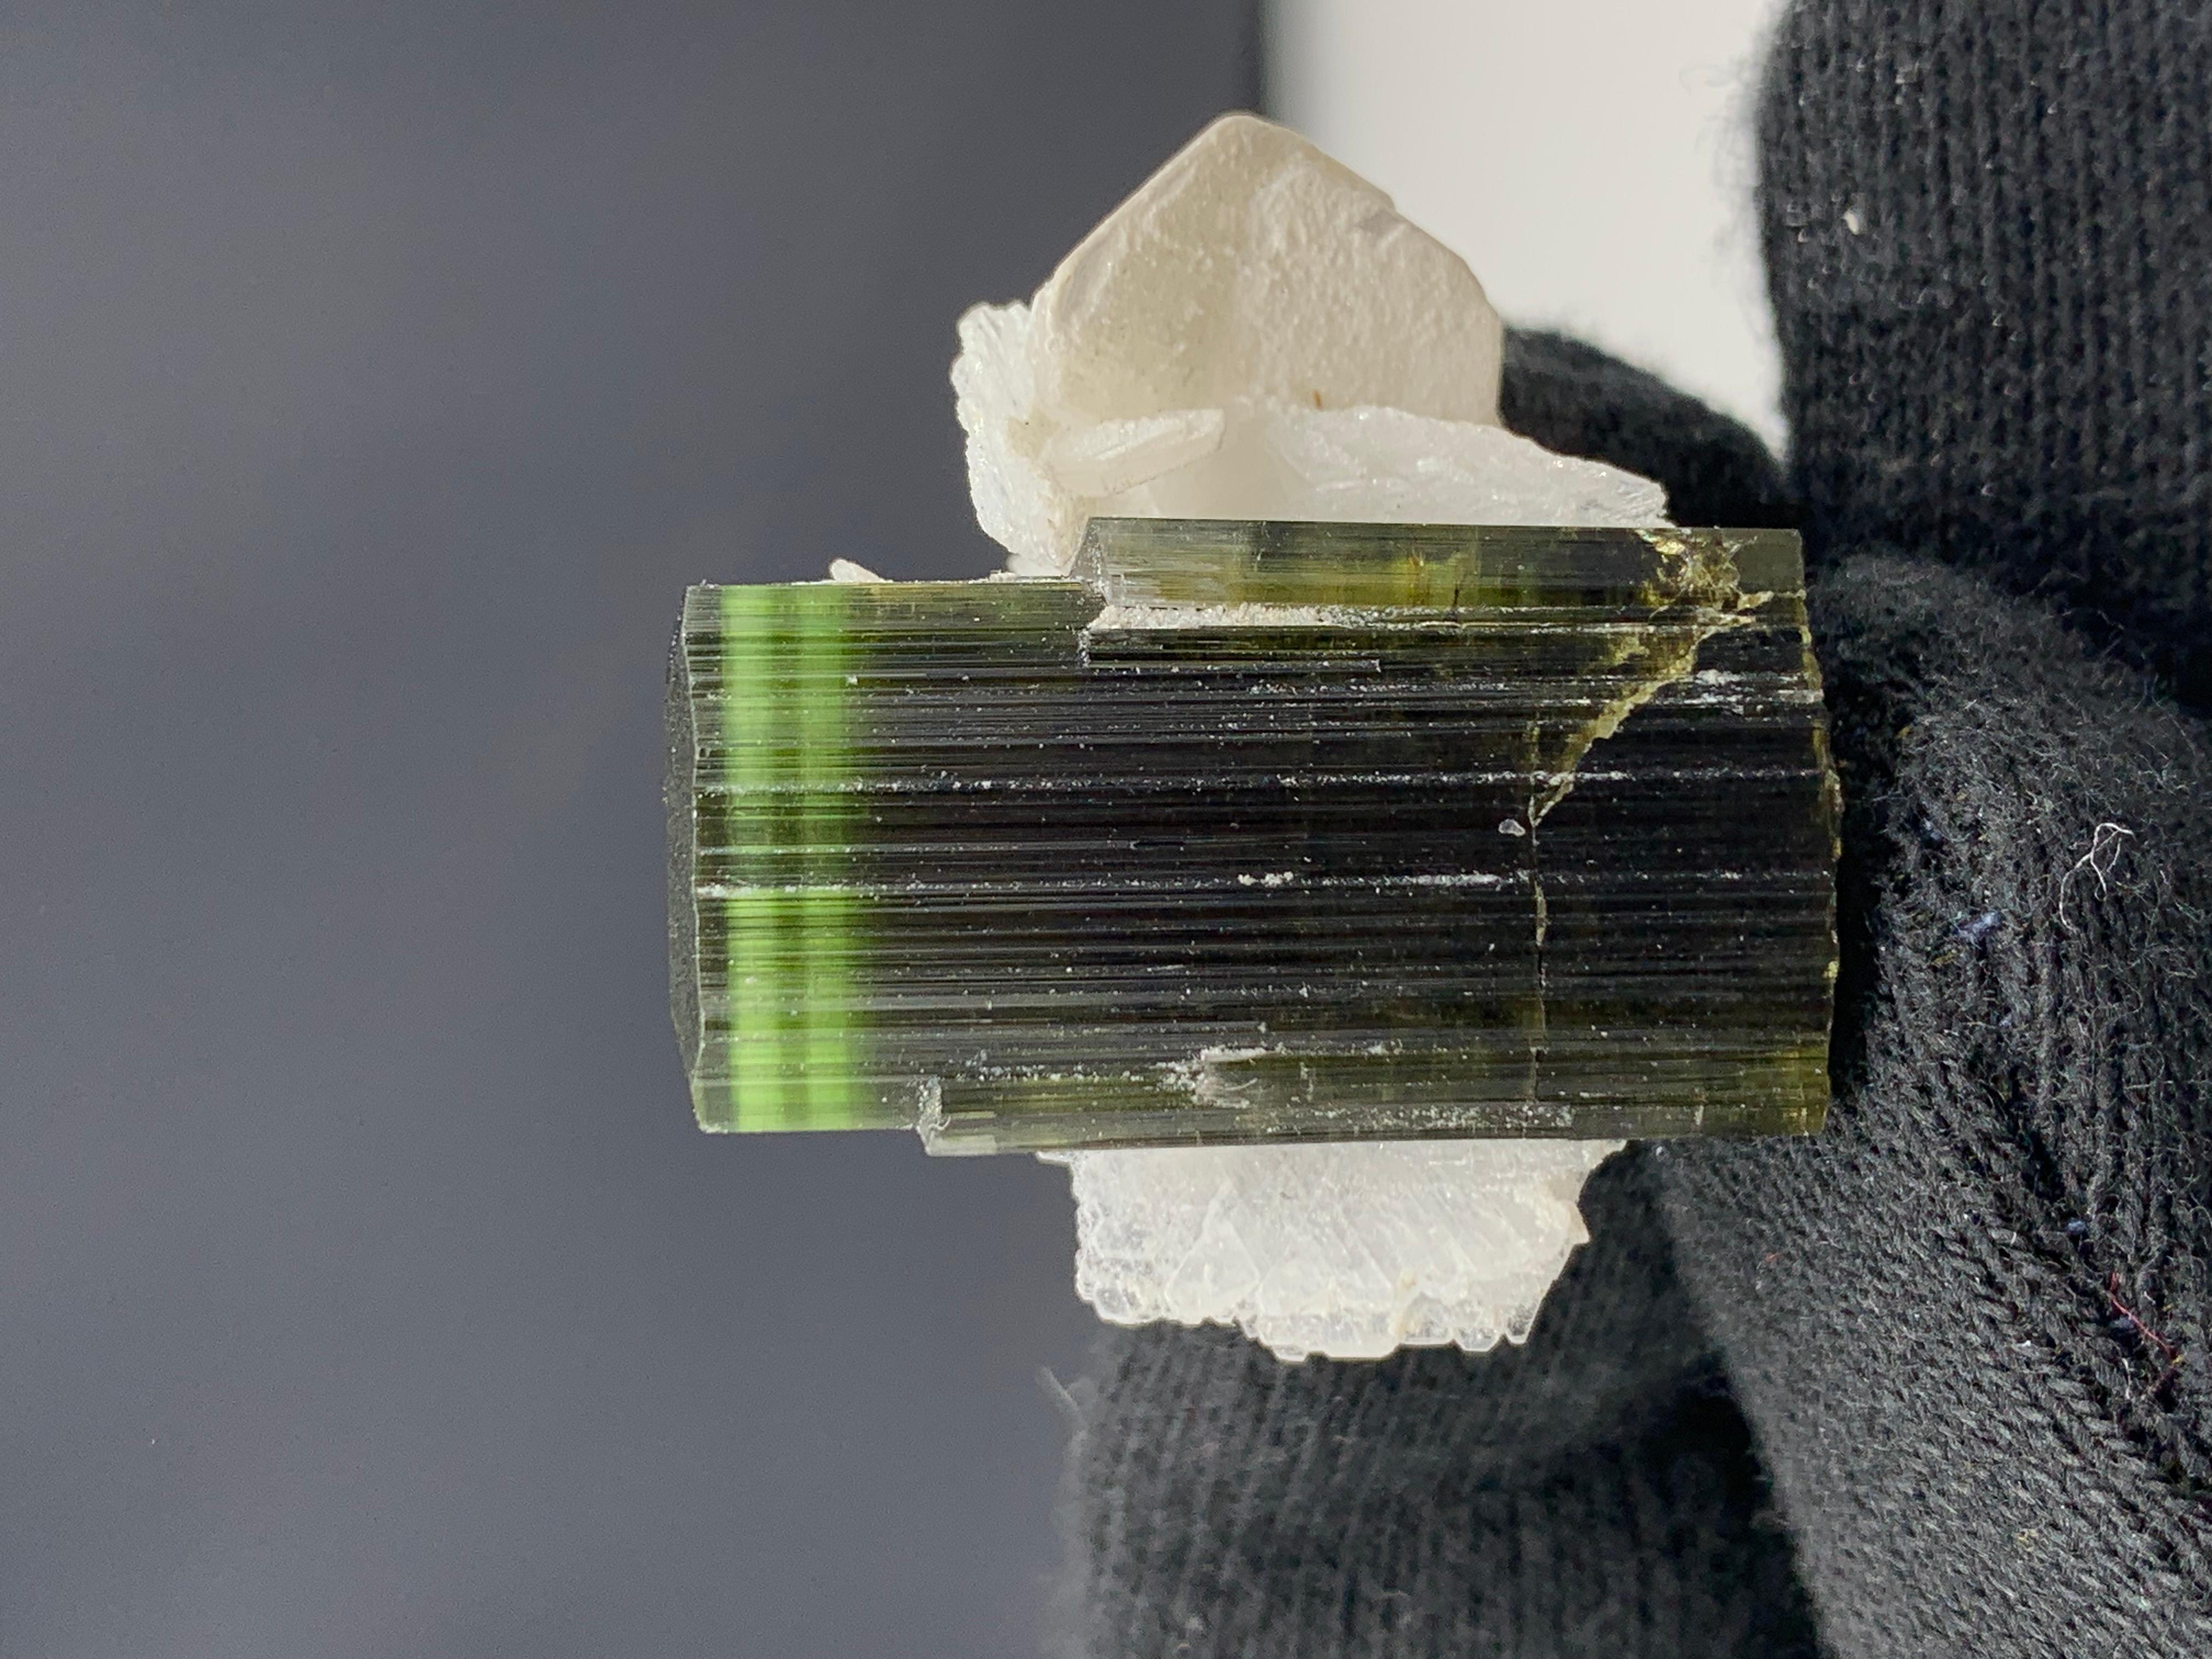 10.00 Gram Beautiful Tourmaline Specimen From Stak Nala, Skardu, Pakistan 

Weight: 10.00 Gram 
Dimension: 2.6 x 2.7 x 1.3 Cm
Origin: Stak Nala, Skardu, Pakistan 

Tourmaline is a crystalline silicate mineral group in which boron is compounded with